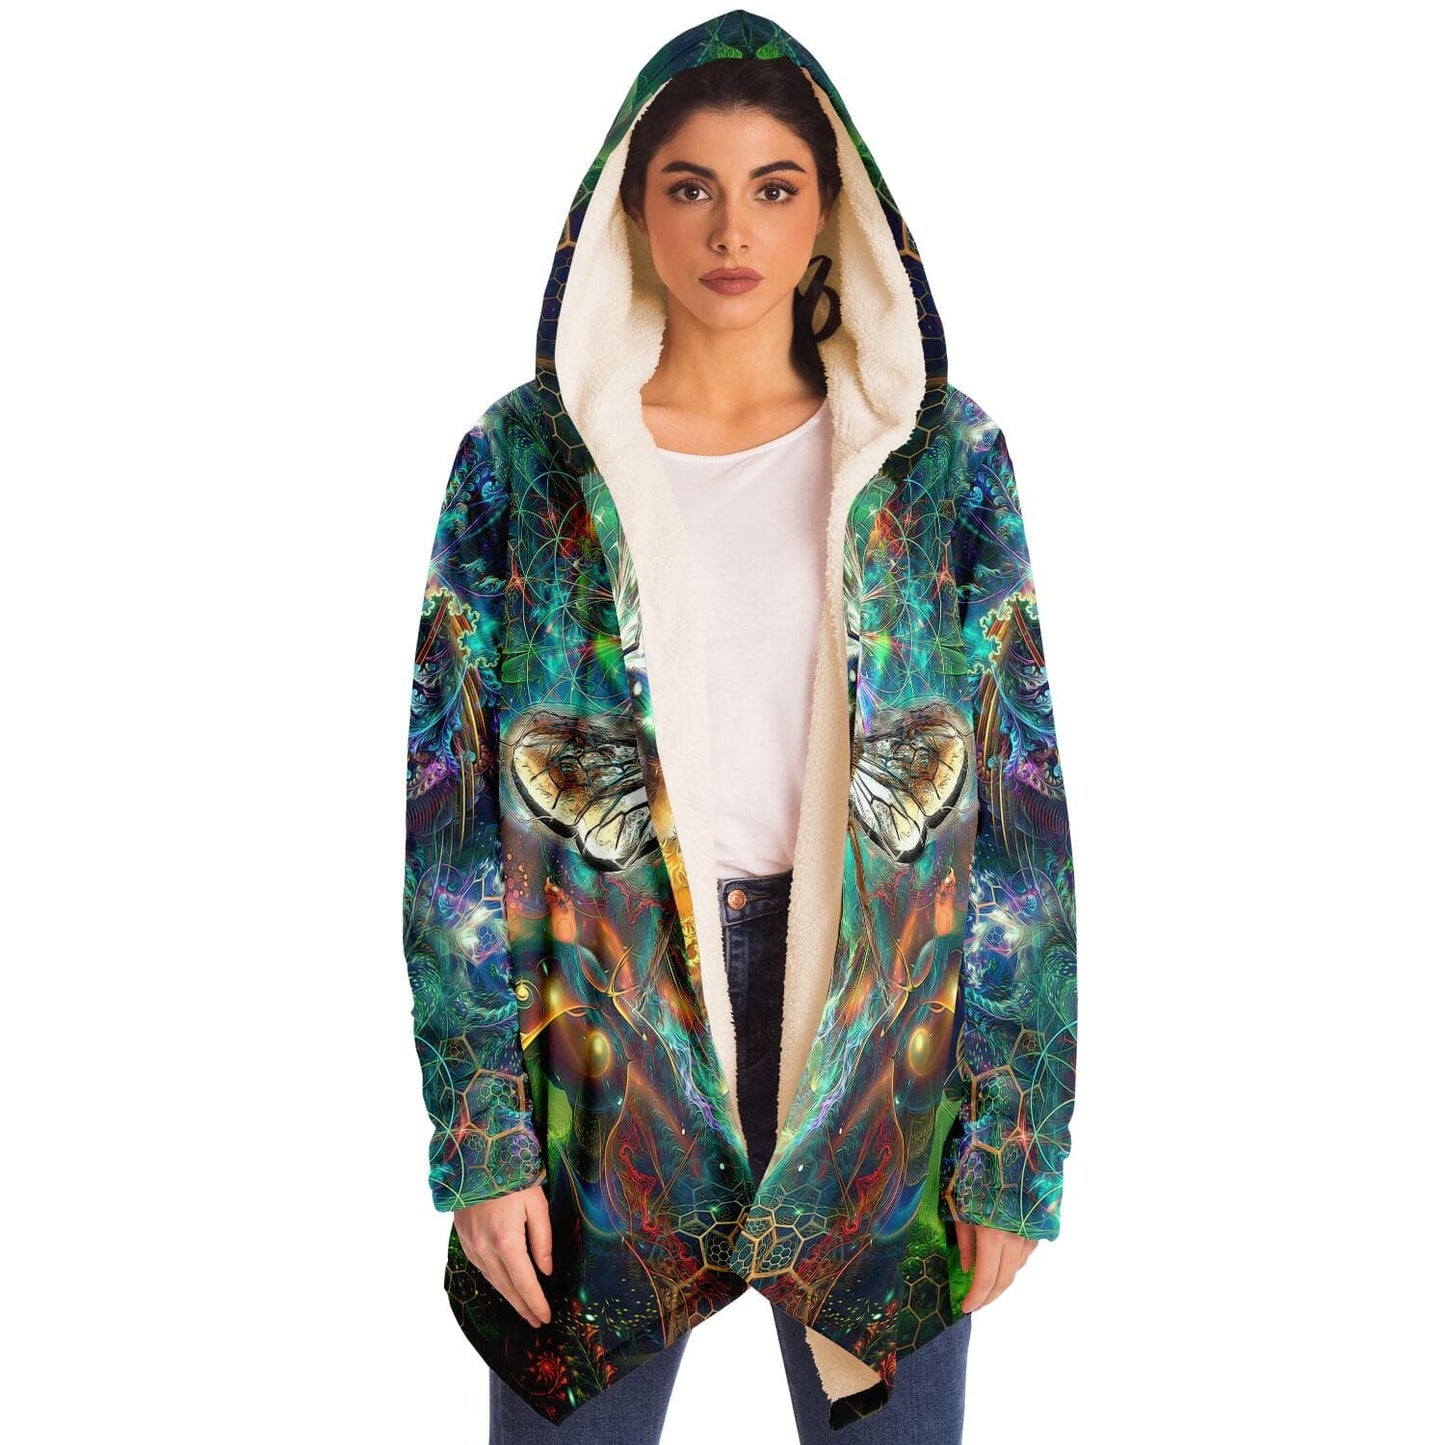 "To Bee or Not to Bee" HOODED CLOAK